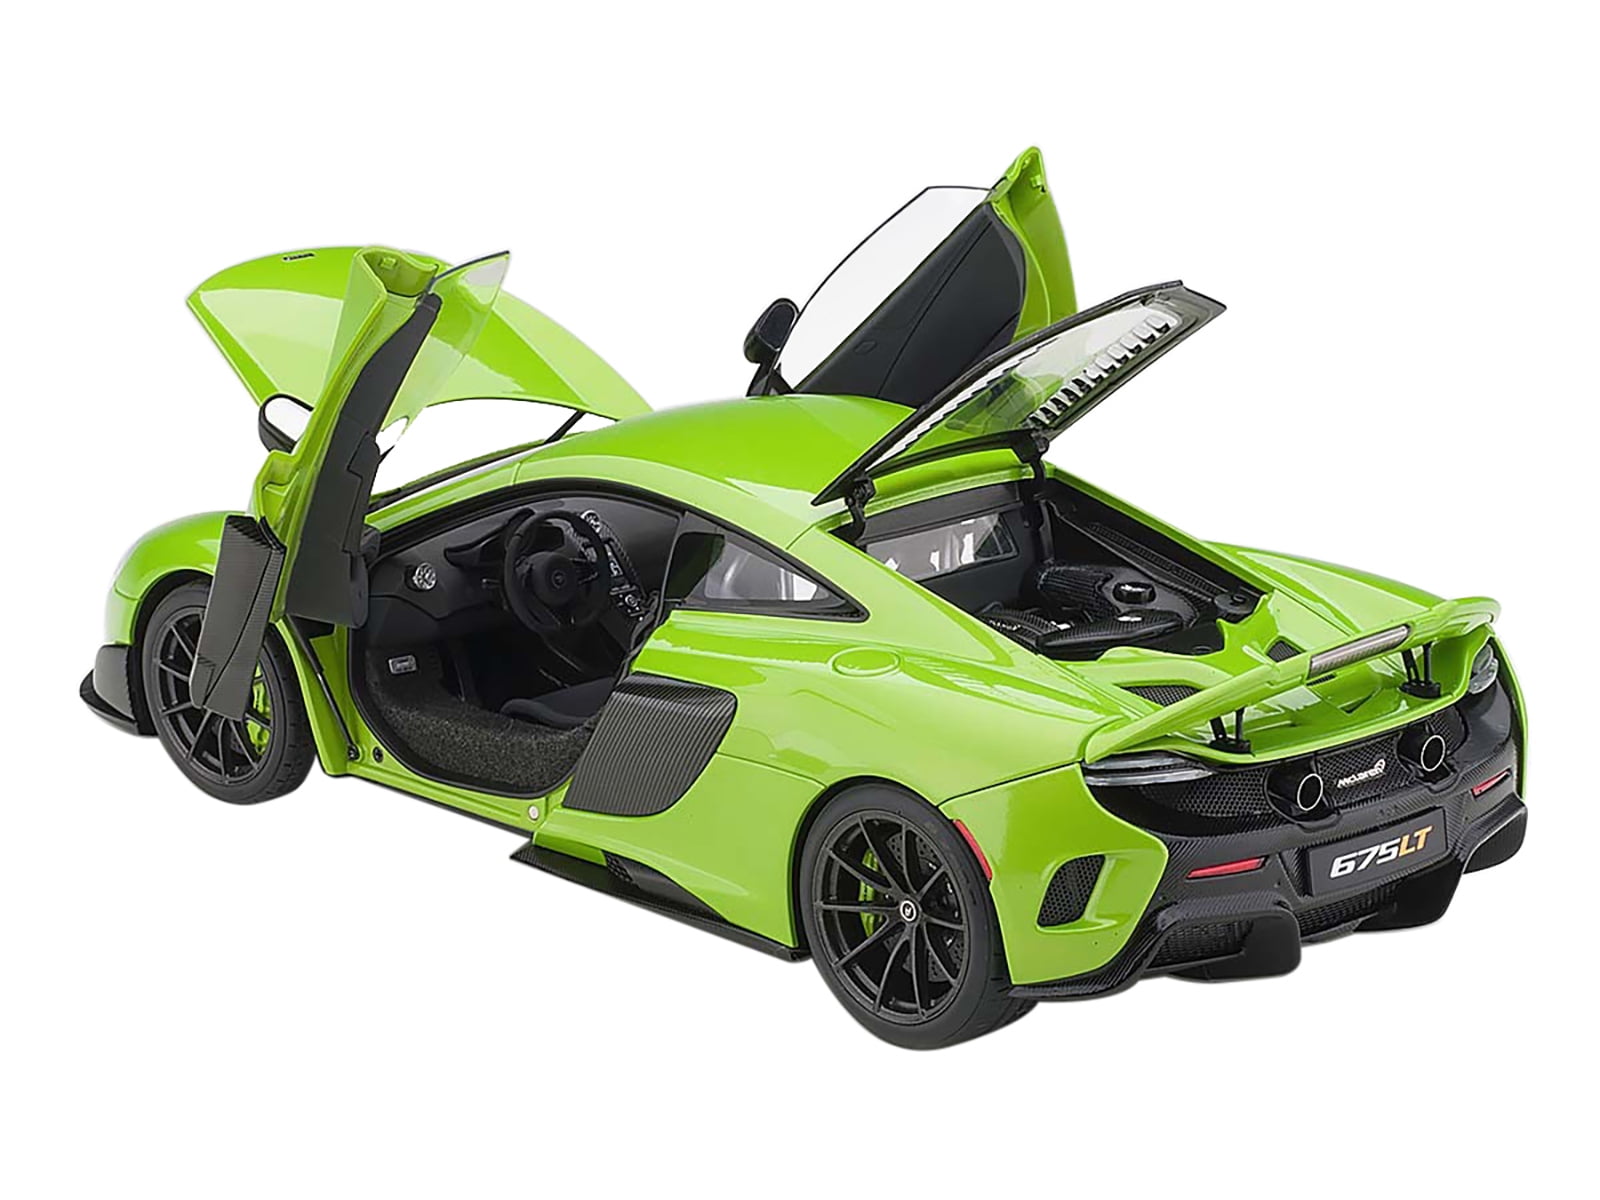 Picture of Autoart 76049 Mclaren 675LT Napier Wheels 1 by 18 Scale Model Car, Green with Black